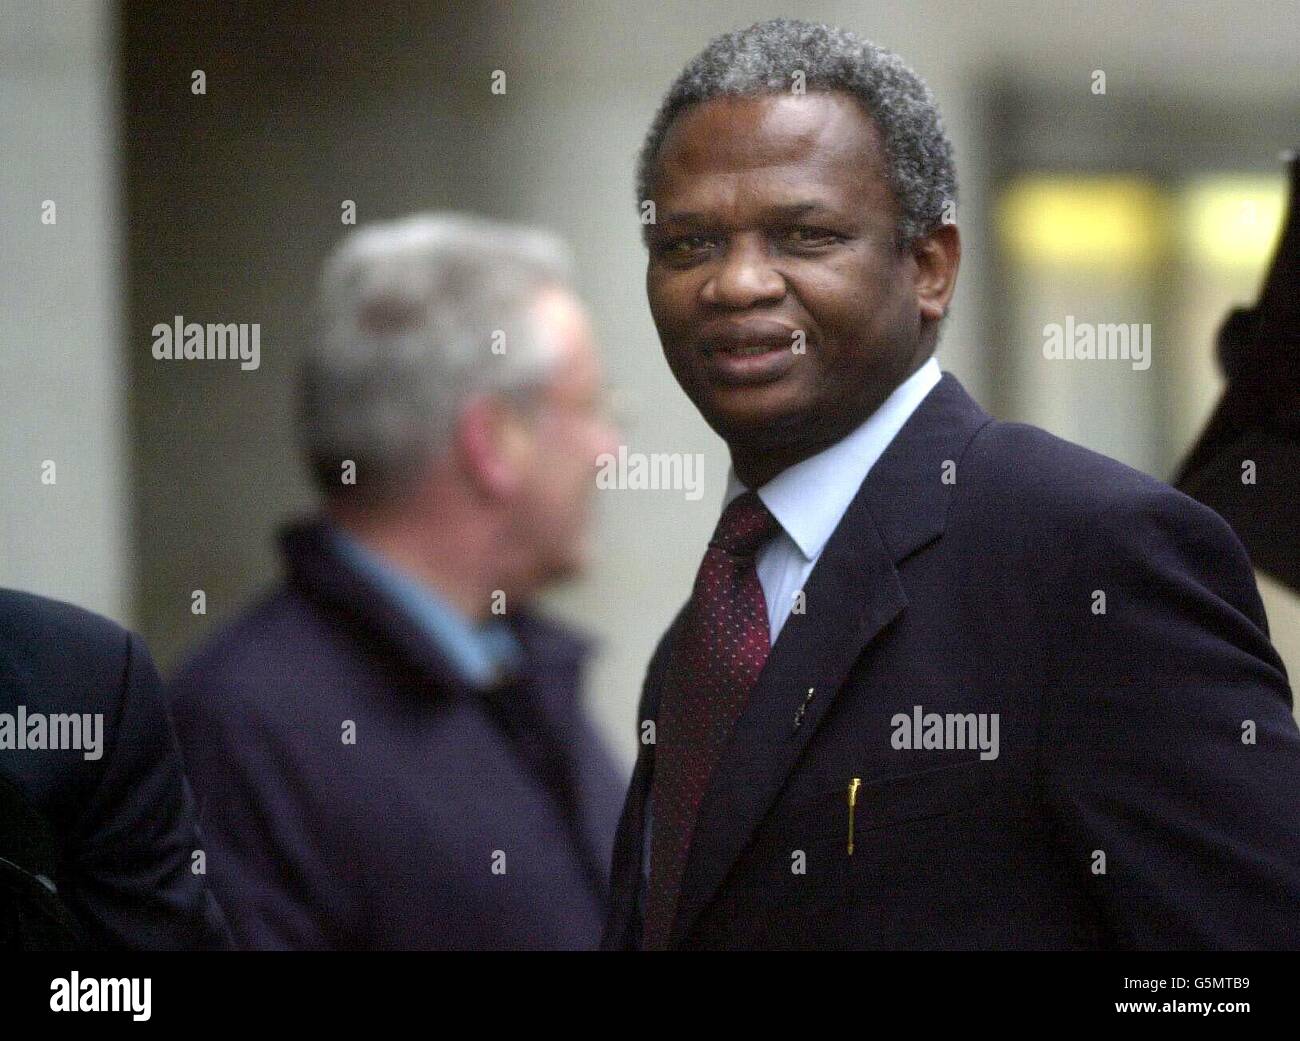 Richard Taylor arrives at the Old Bailey in central London where four teenage boys are accused of murdering his 10-year-old son Damilola. Nigerian-born Damilola was attacked on his way home from an after-school computer class in Peckham, south London. *... on November 27, 2000. He bled to death in a stairwell after he was stabbed in the leg. The trial of the four boys, one aged 14, the others aged 16, will not get under way properly due to legal discussions. Stock Photo